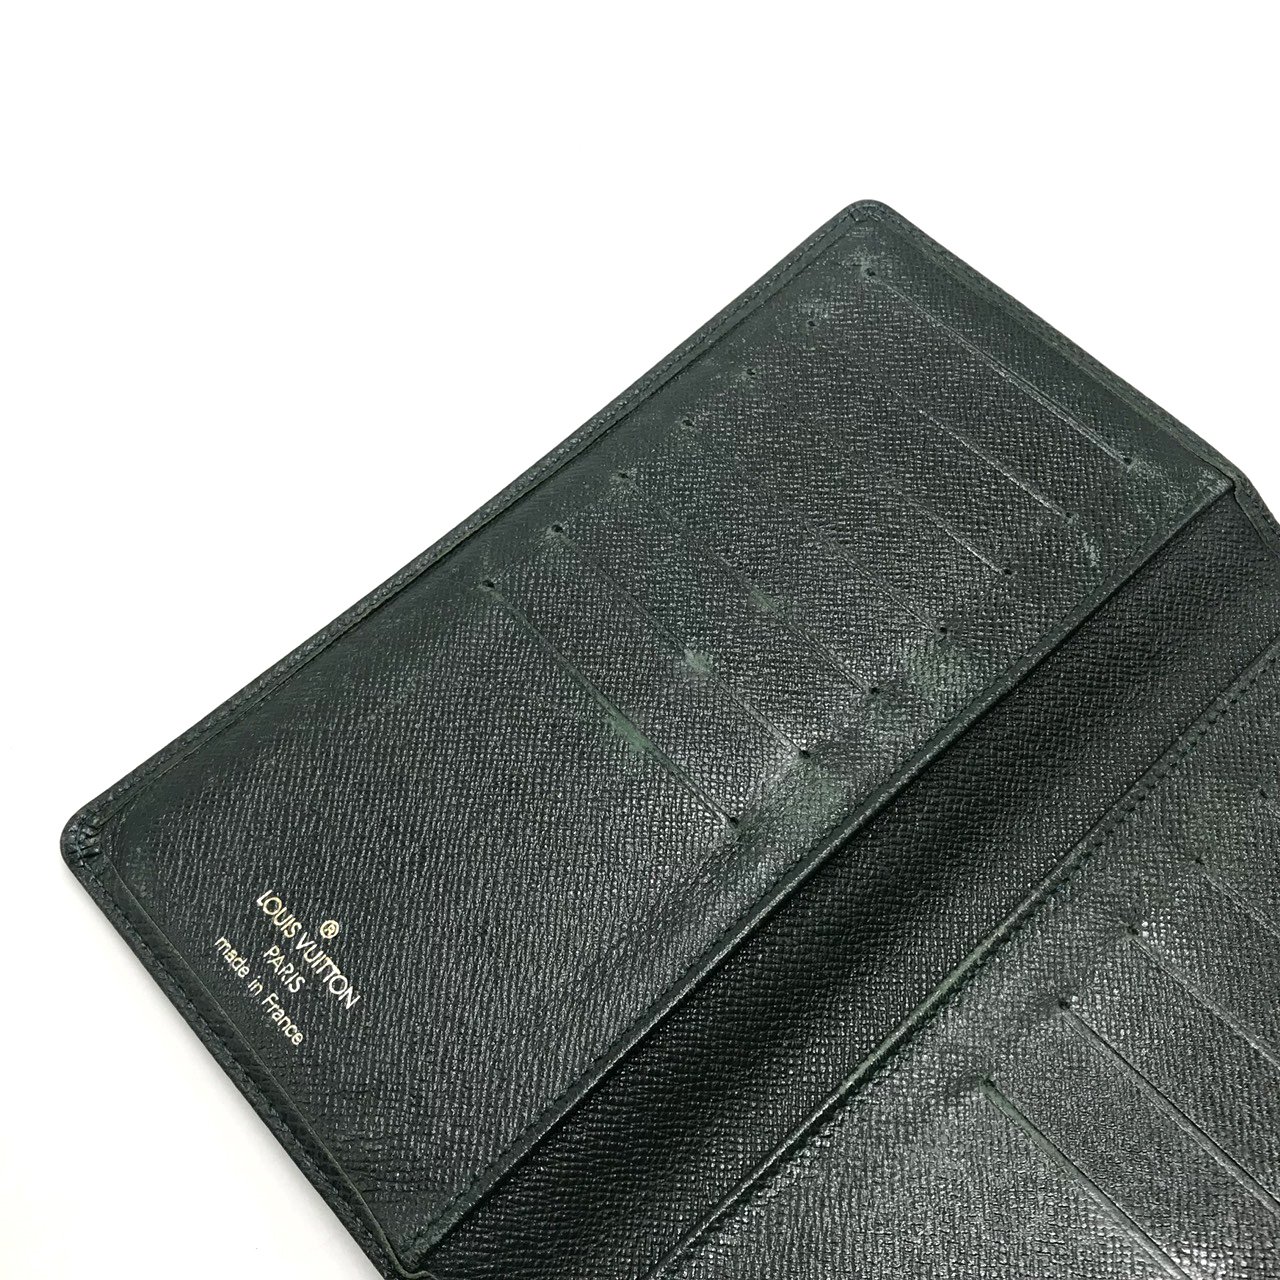 Used LV Brazza Long Wallet in Green Taiga Leather - moppetbrandname